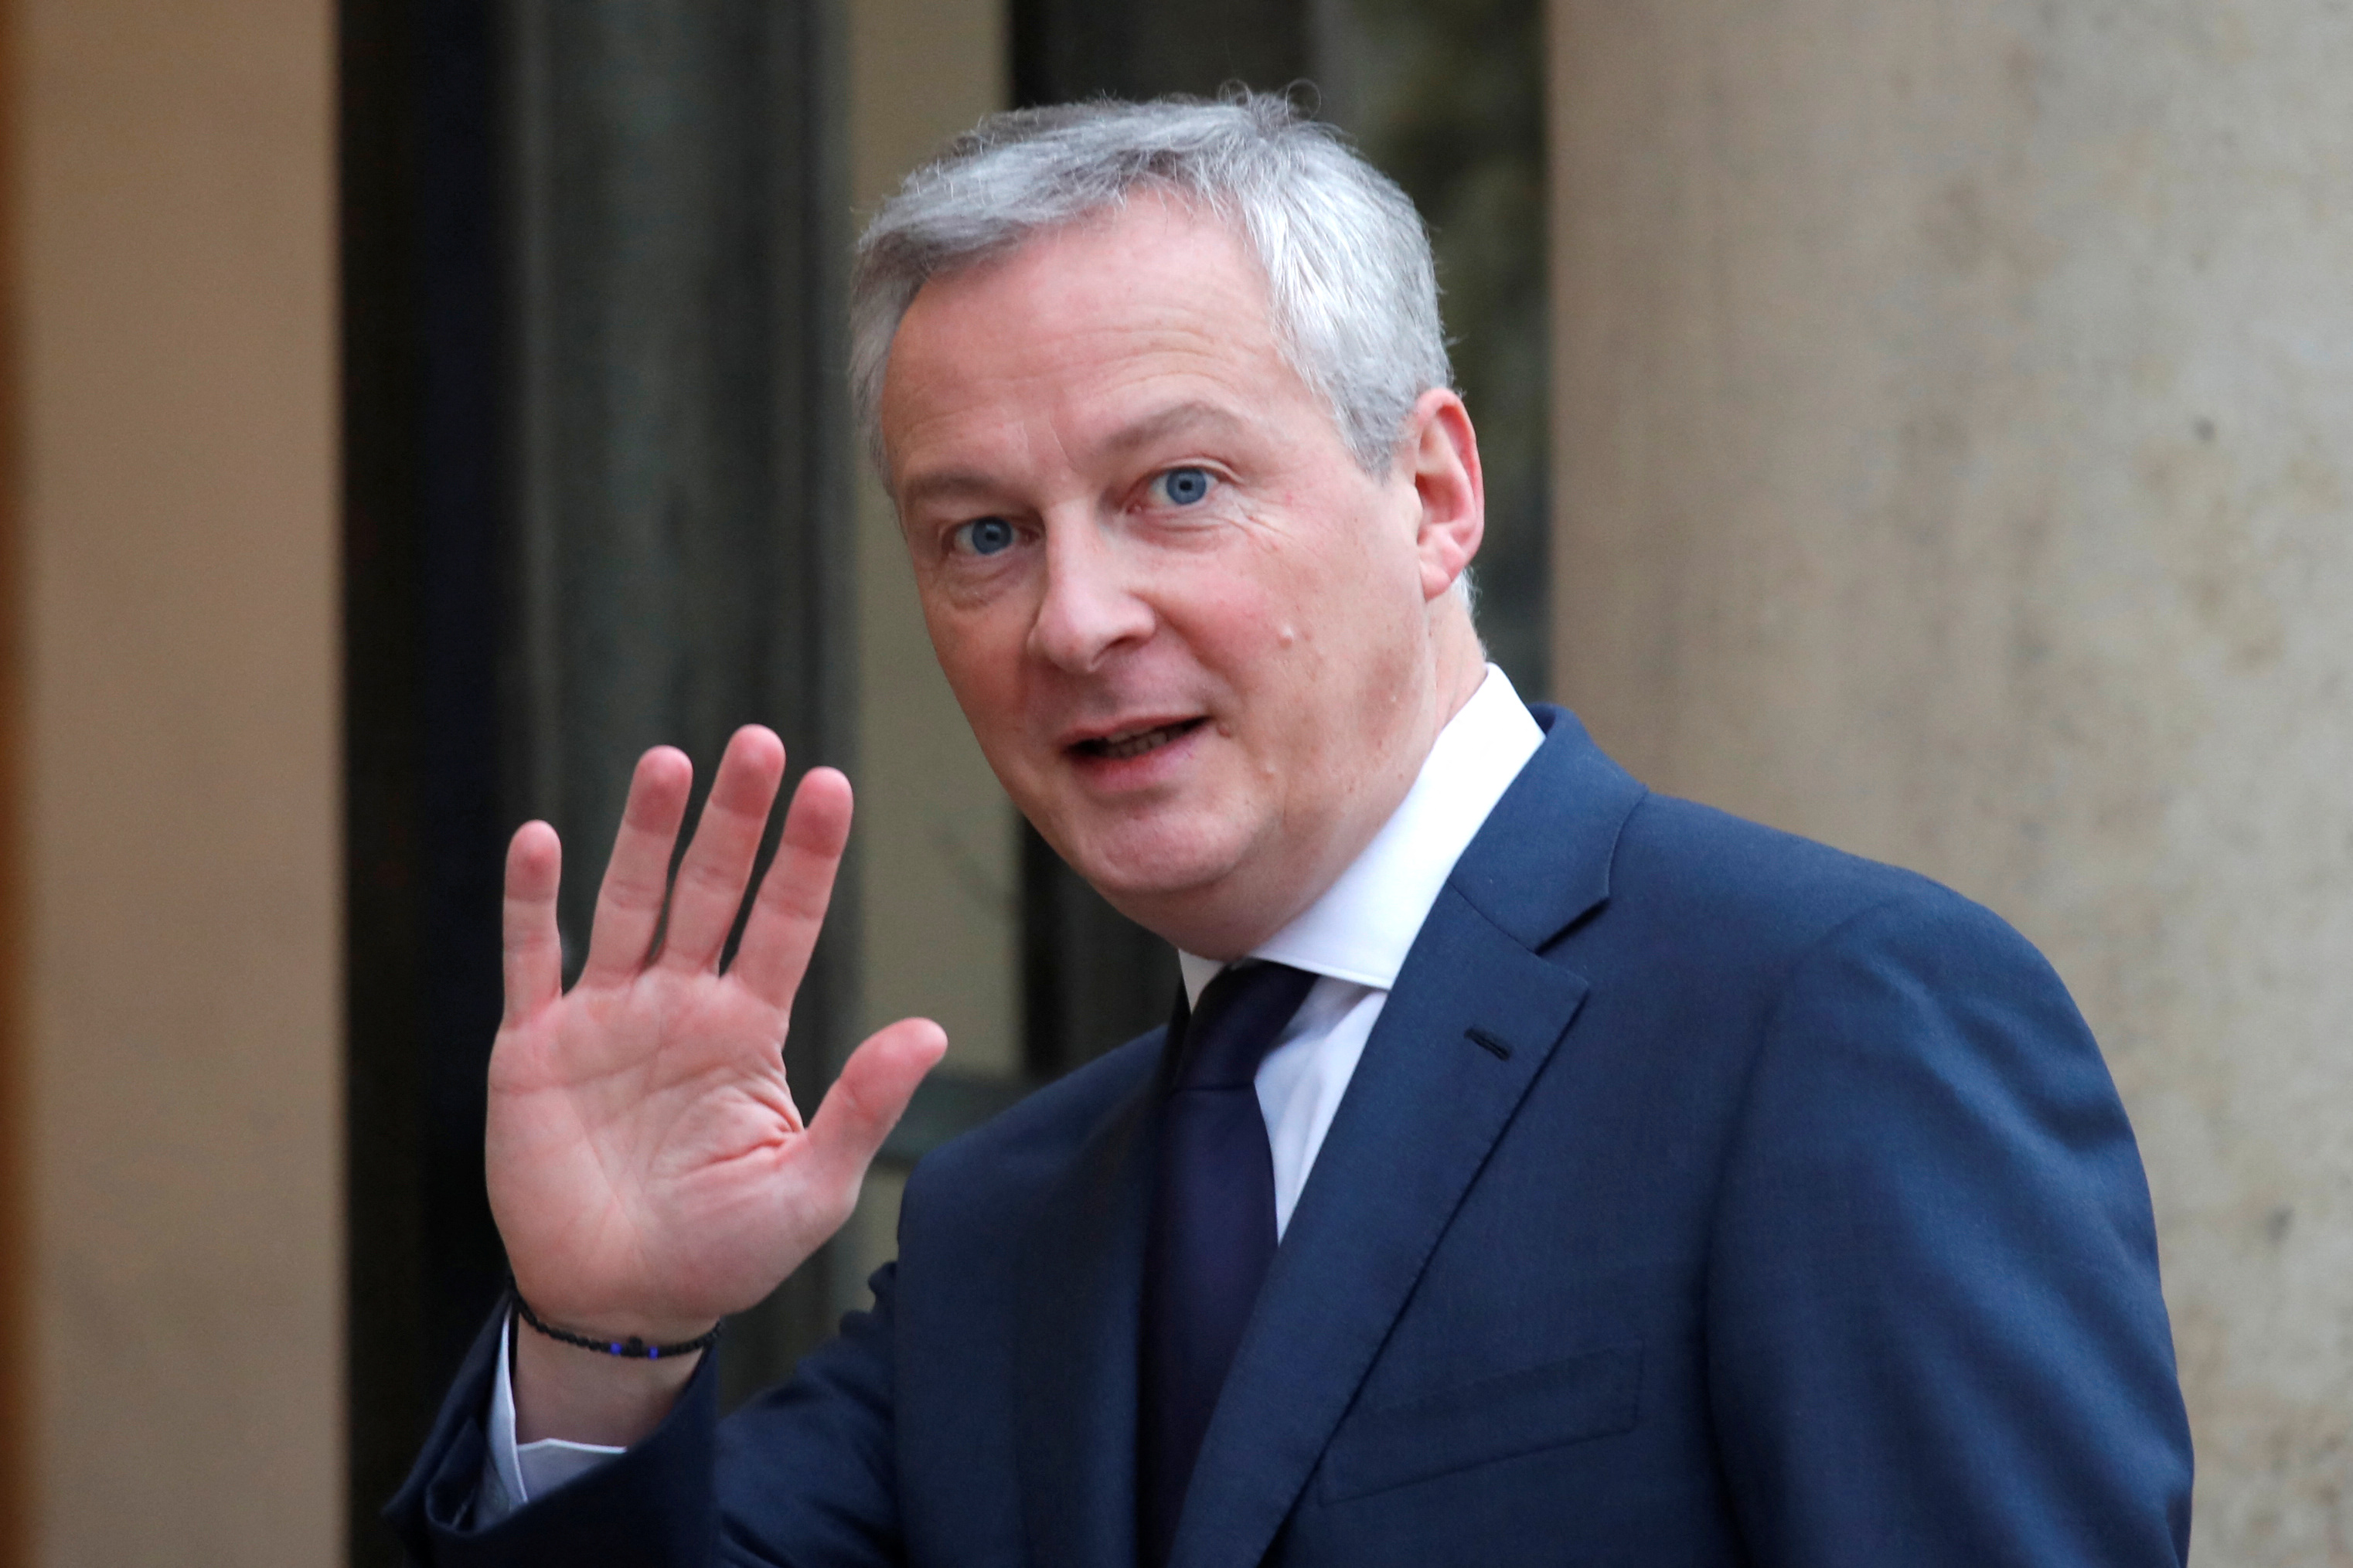 French Finance Minister Bruno Le Maire arrives at the Elysee Palace in Paris